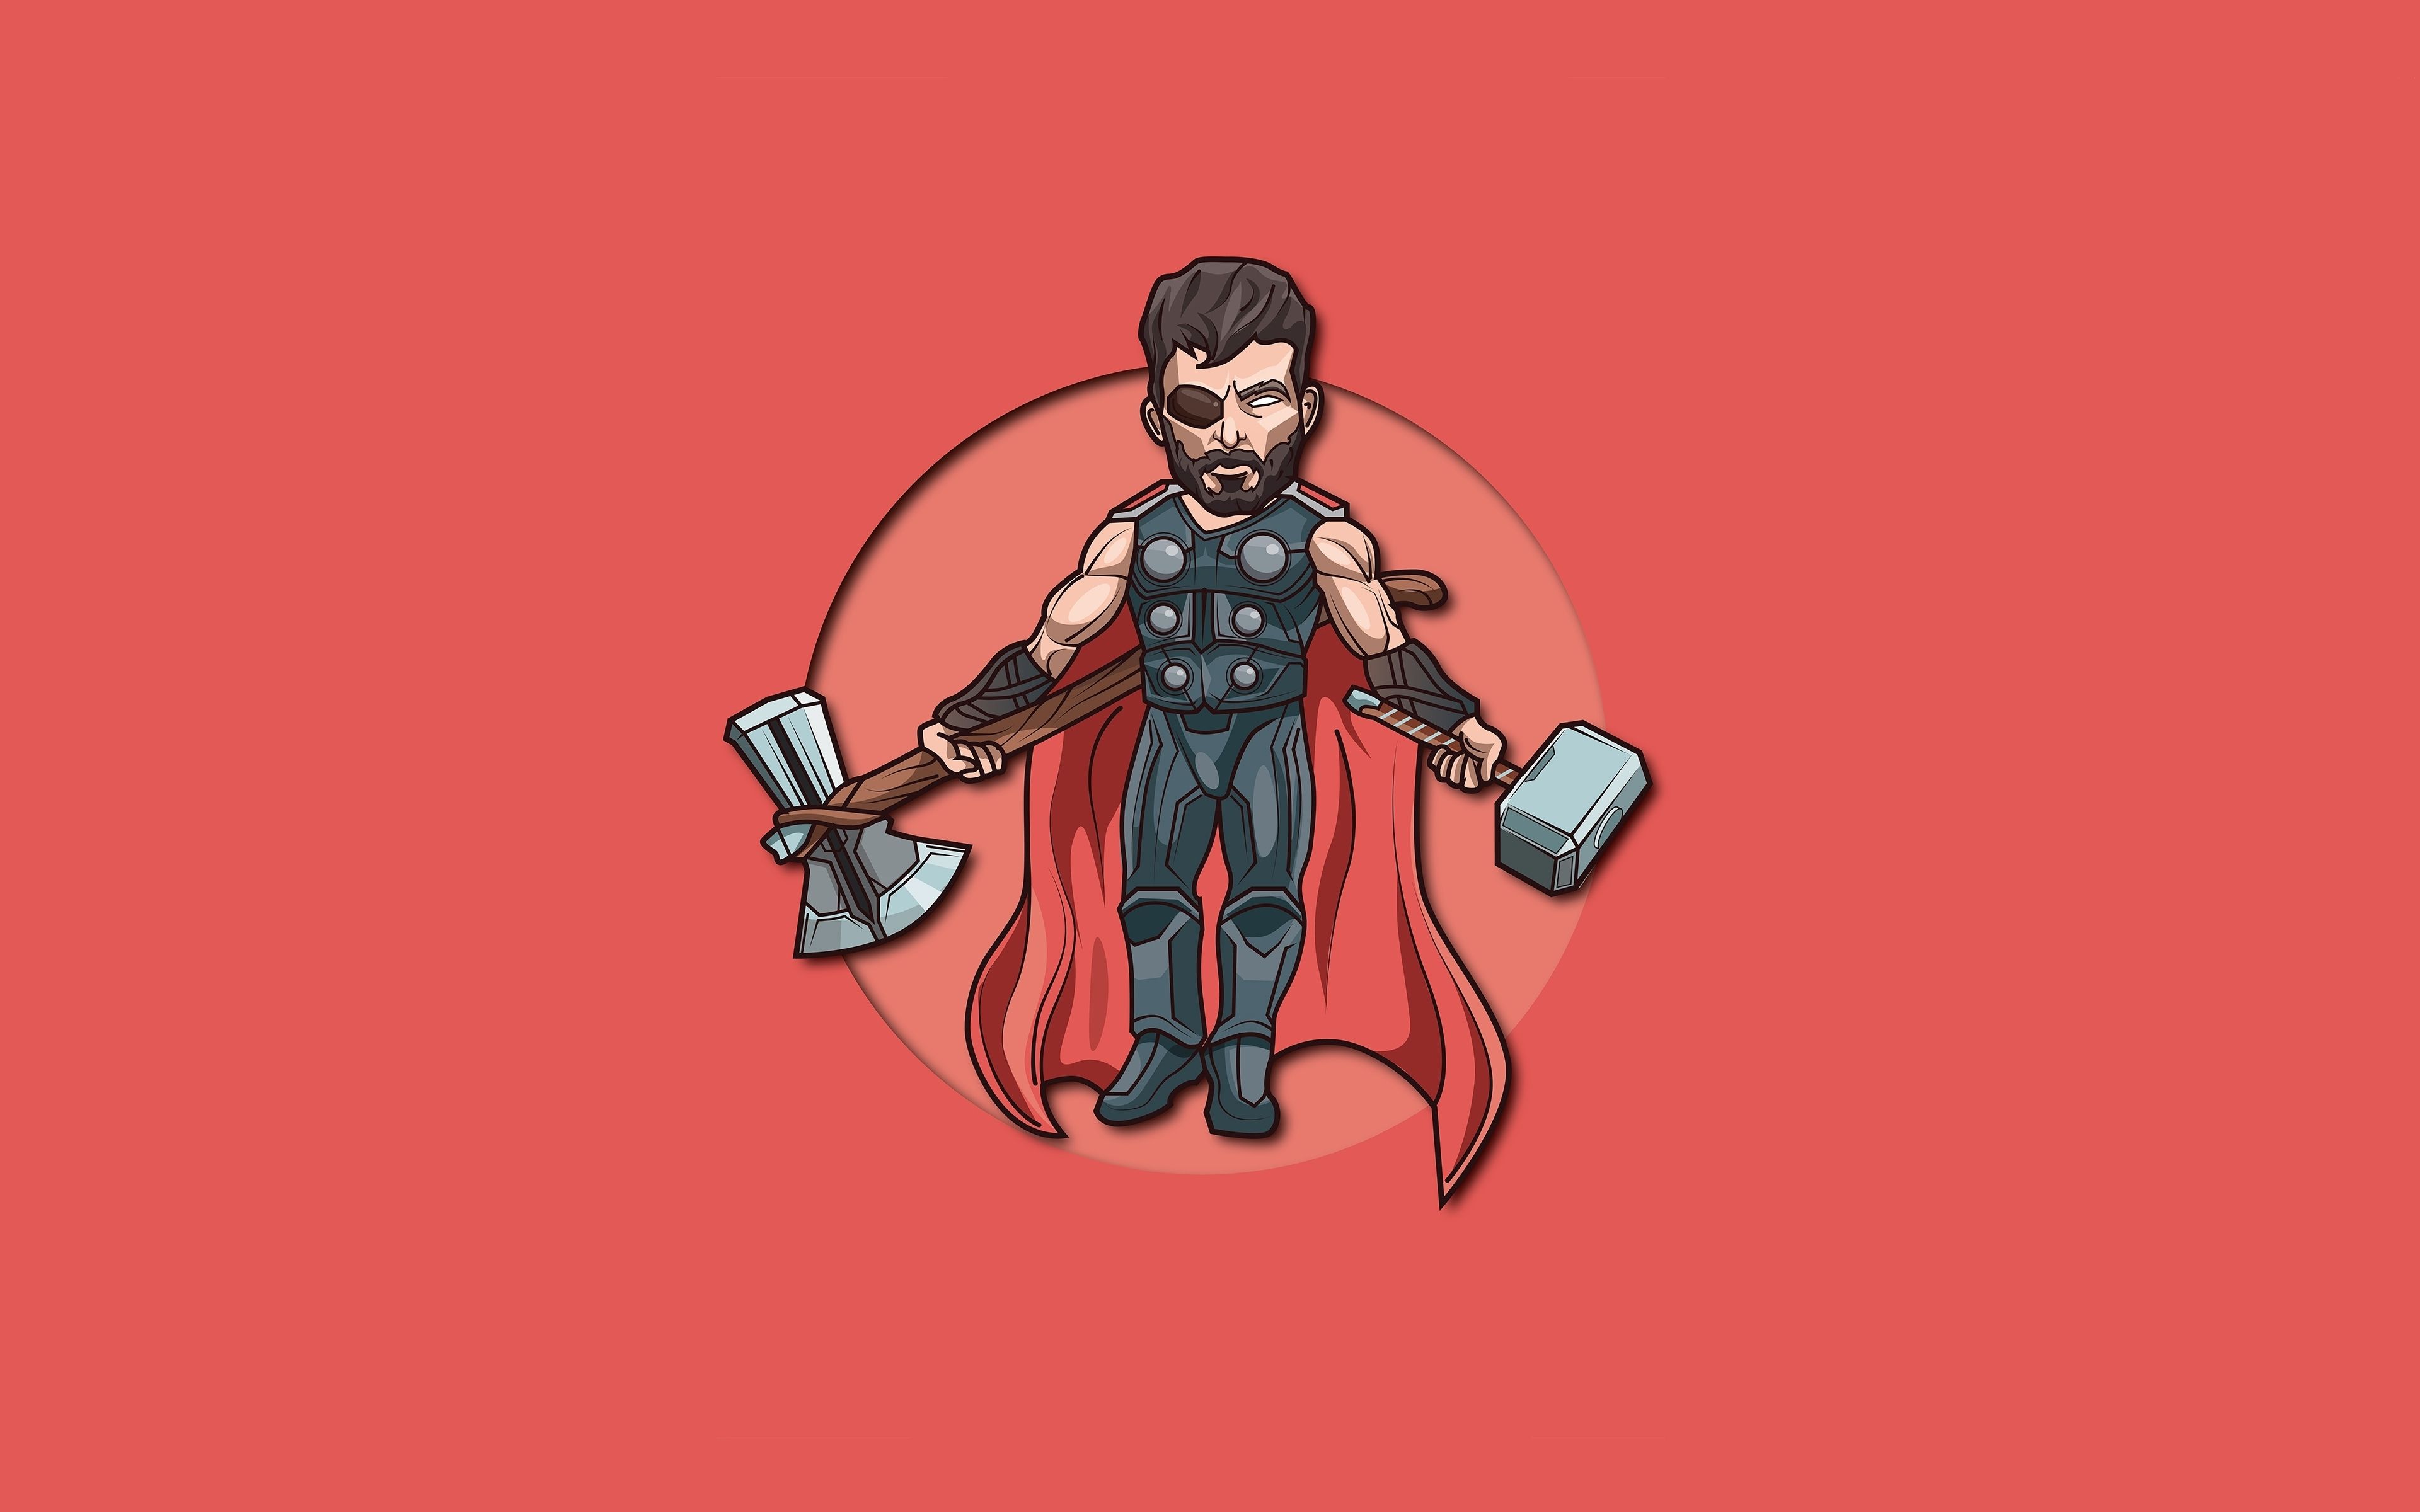 Download 3840x2400 wallpaper minimal, thor with 2 hammers, 4k, ultra HD 16: widescreen, 3840x2400 HD image, background, 24624